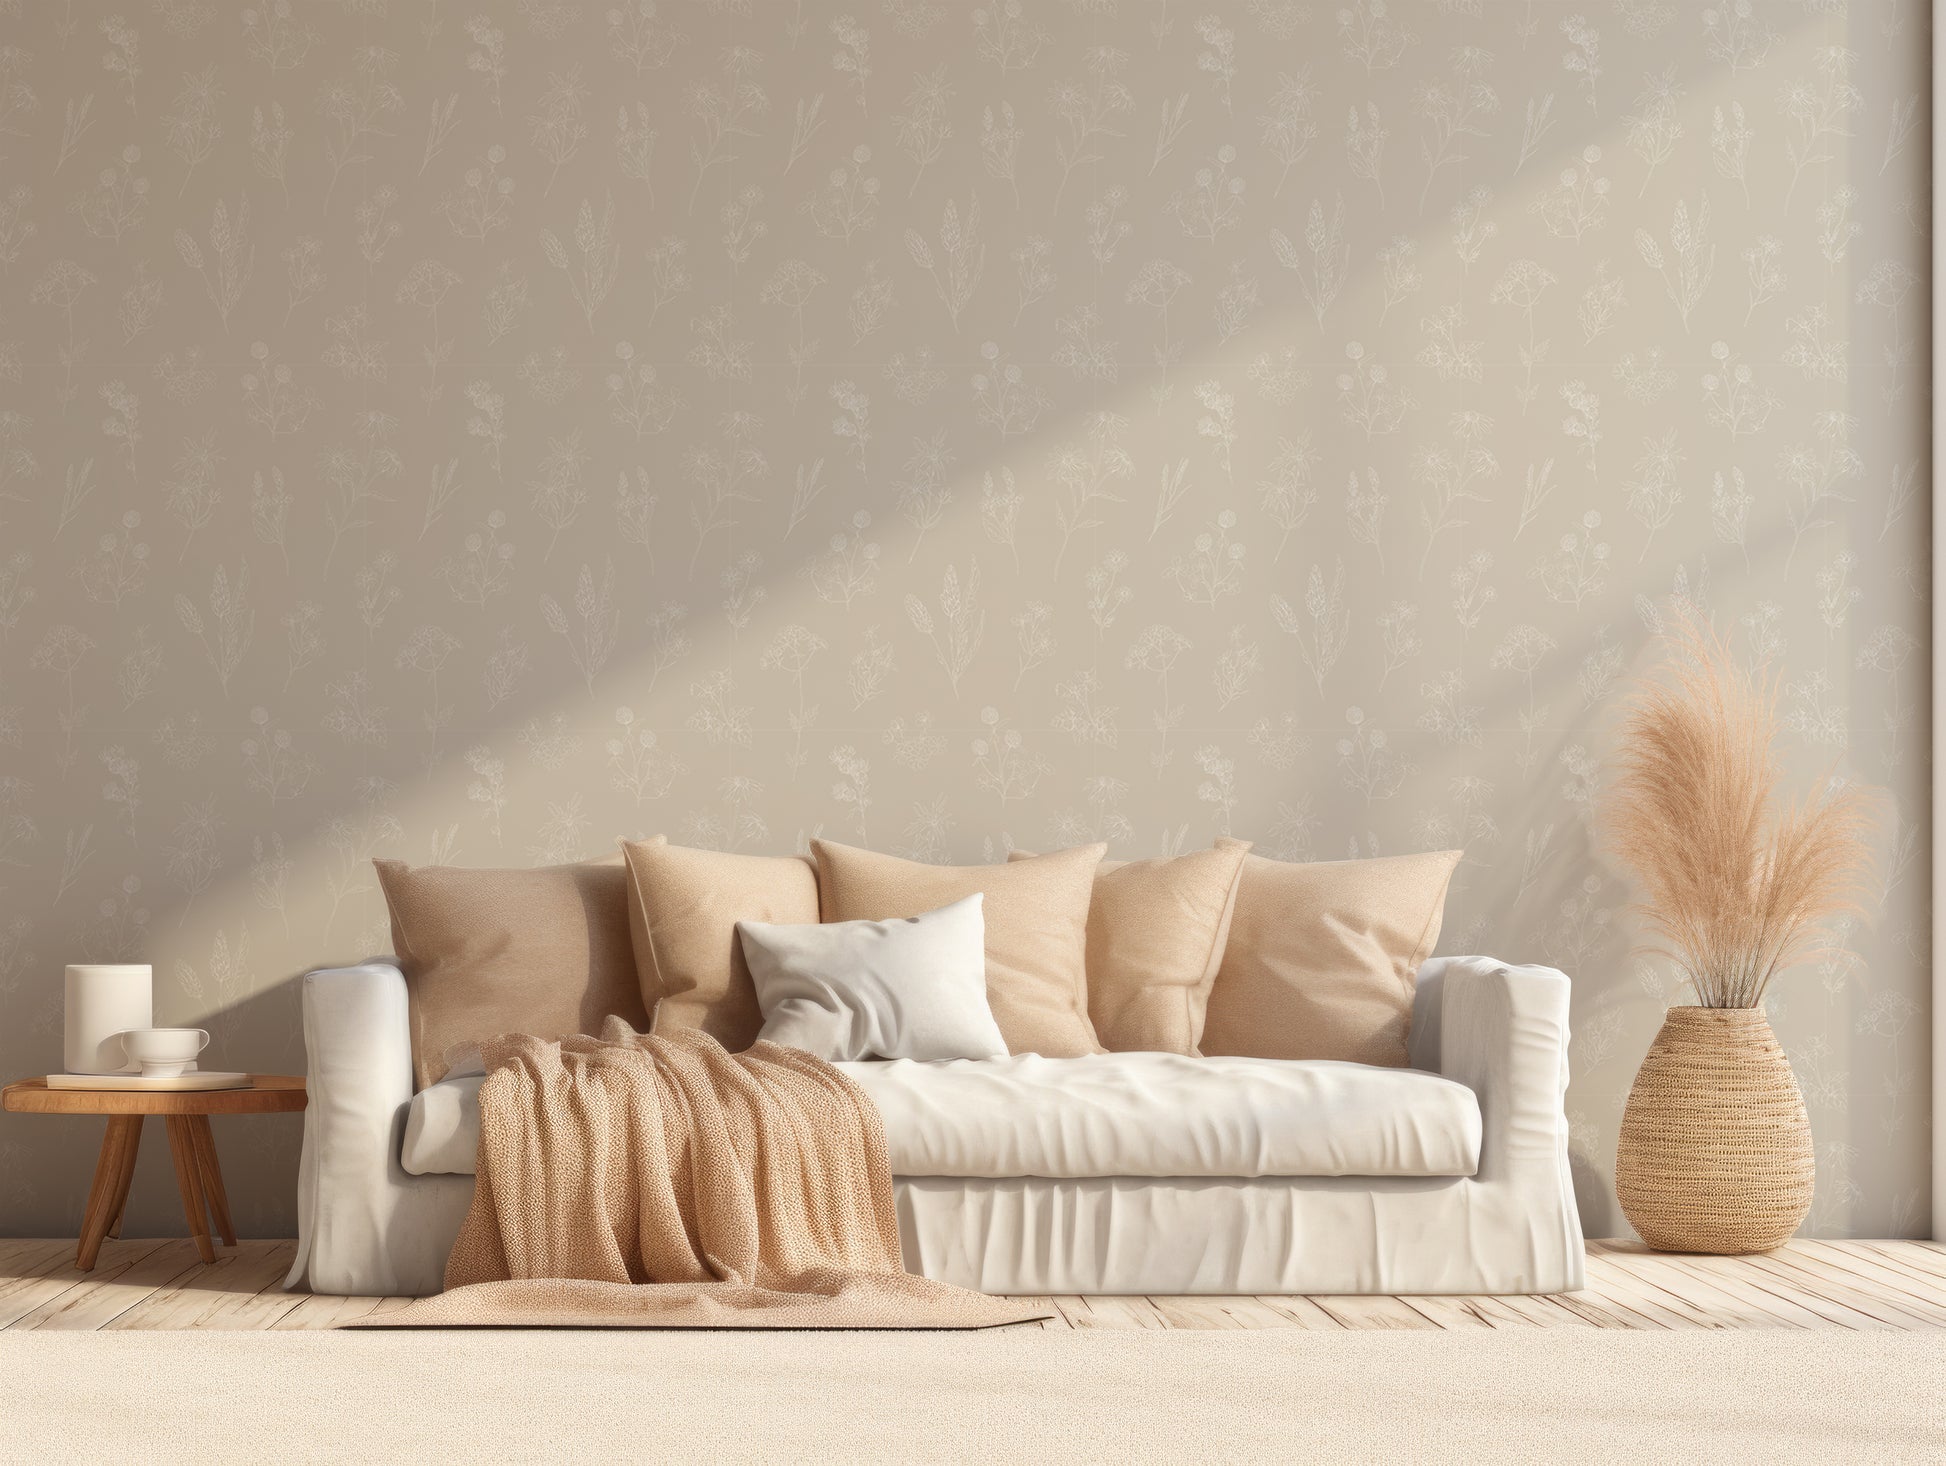 Billie Wallpaper In Living Room With Neutral Cream And Beige Sofa With Feathers Next to Sofa